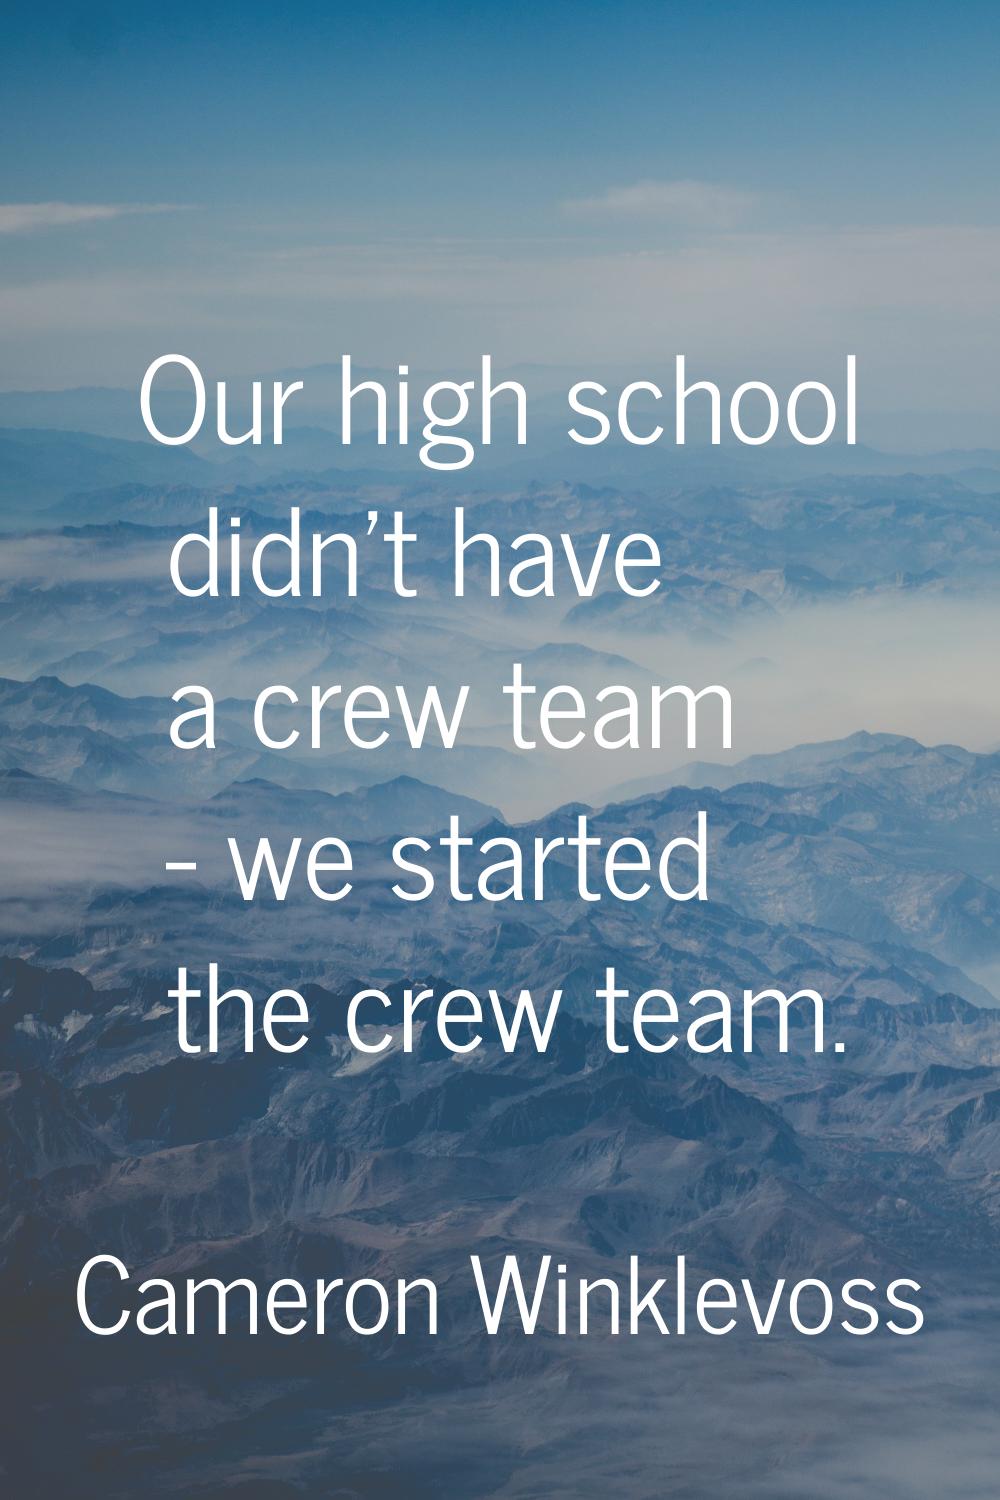 Our high school didn't have a crew team - we started the crew team.